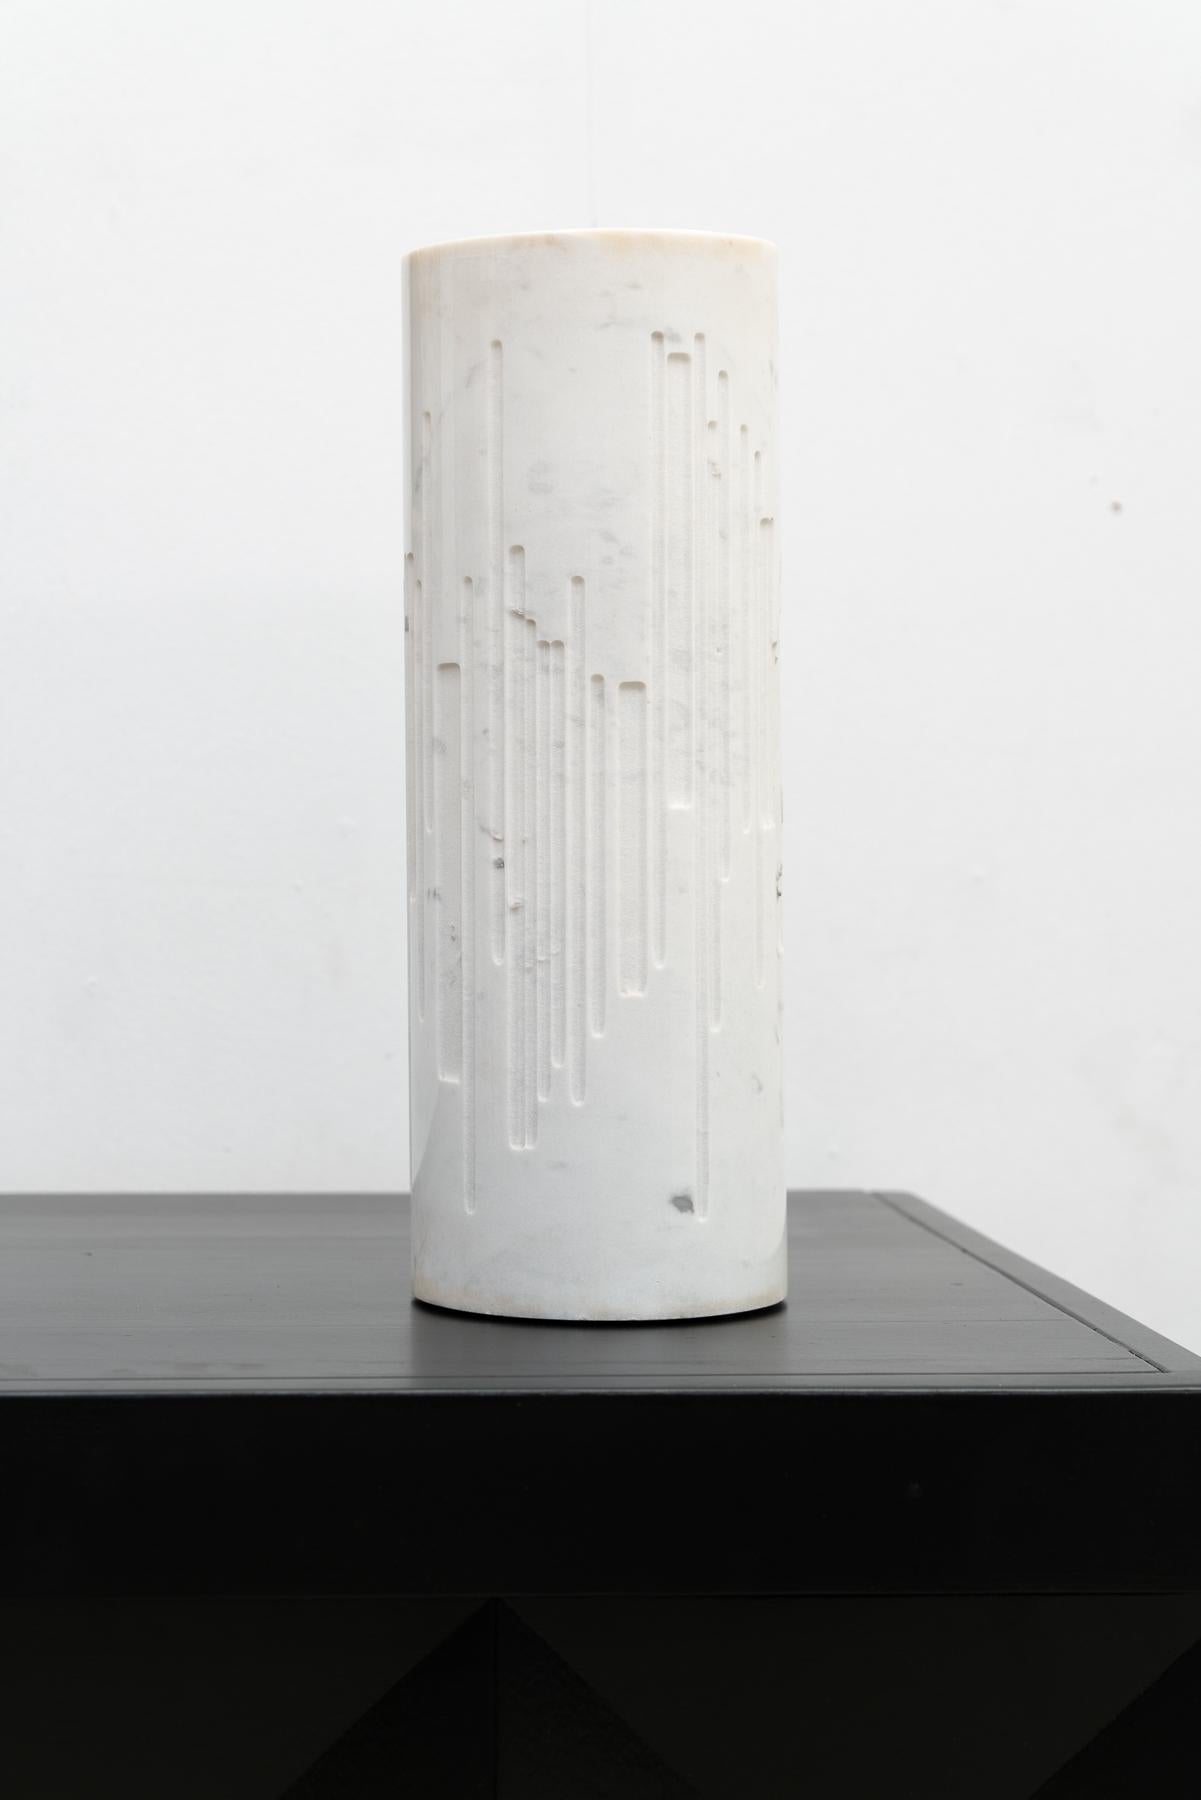 Cylindrical Marble table Lamp by Grupo NP2, crafted in Italy. This lamp features a hollowed-out, engraved tubular design made of Calacatta marble, allowing light to shine through gracefully.

Do not hesitate to contact us for any additional